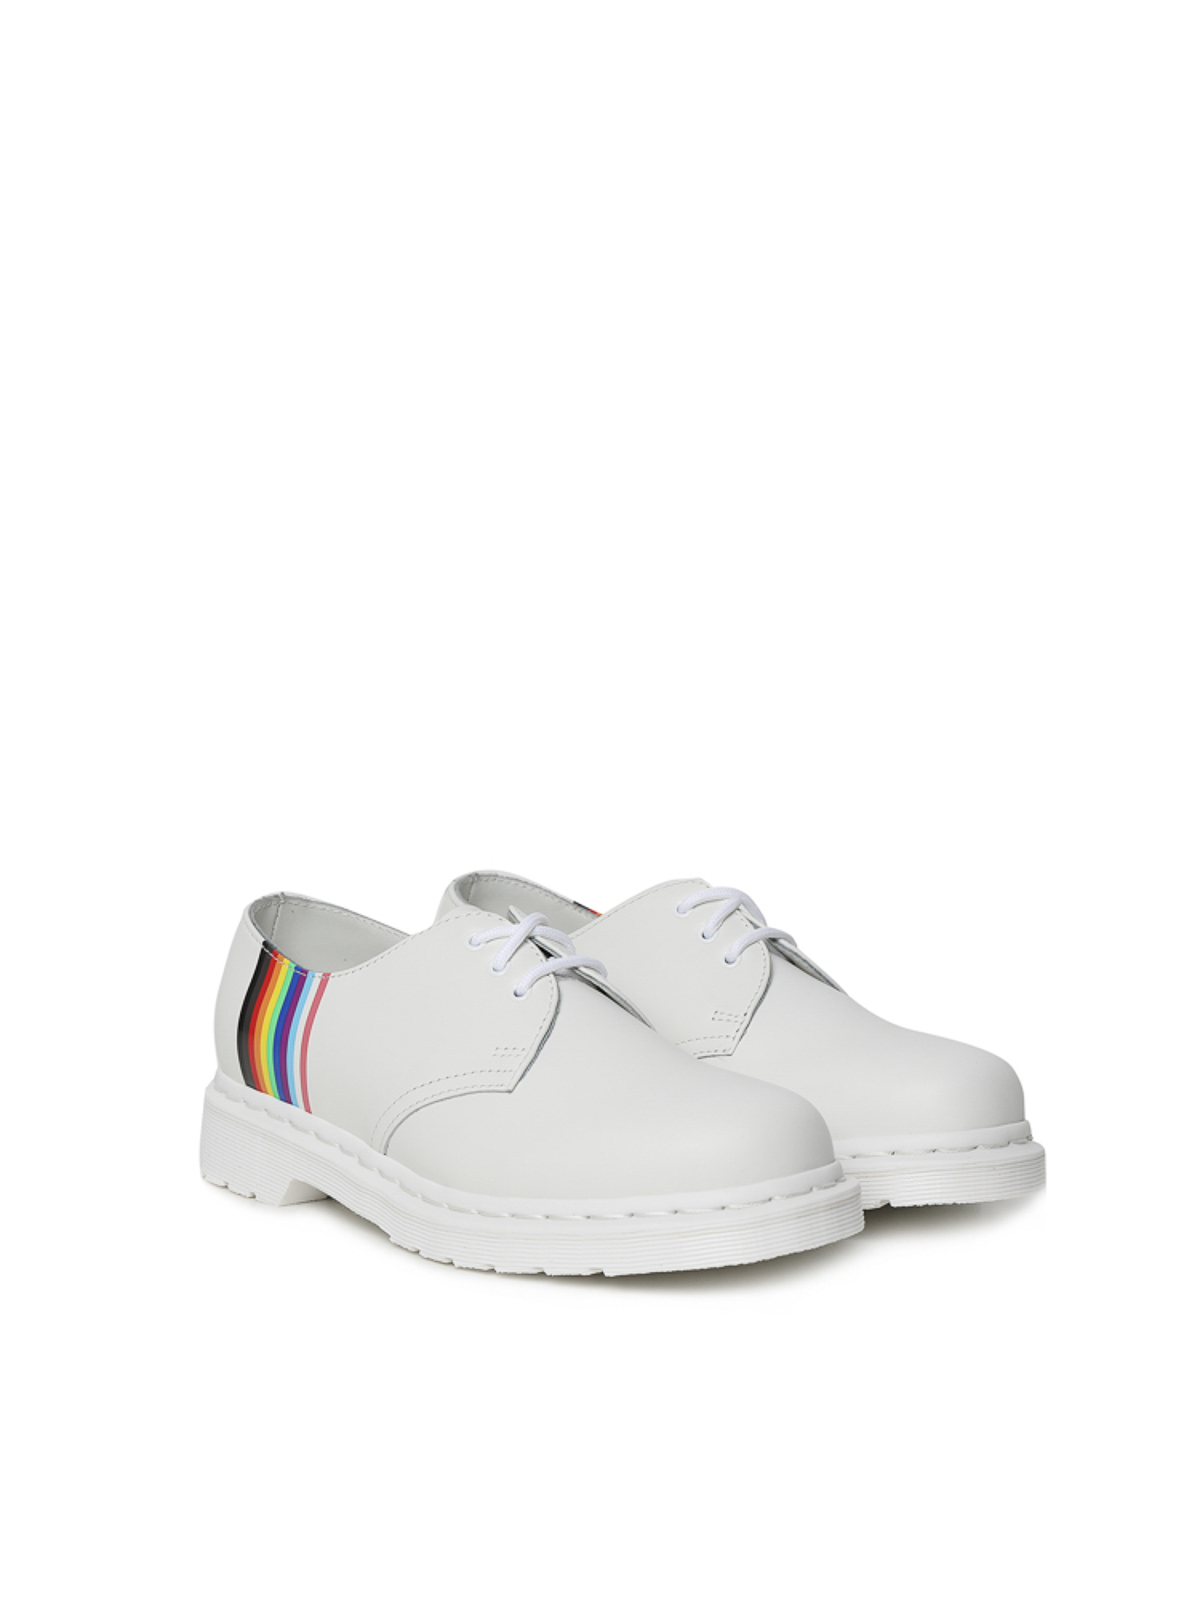 Lace-Ups Shoes Dr. Martens - 1461 Pride Derby Lace-Up -  27522100Pridewhitesmooth